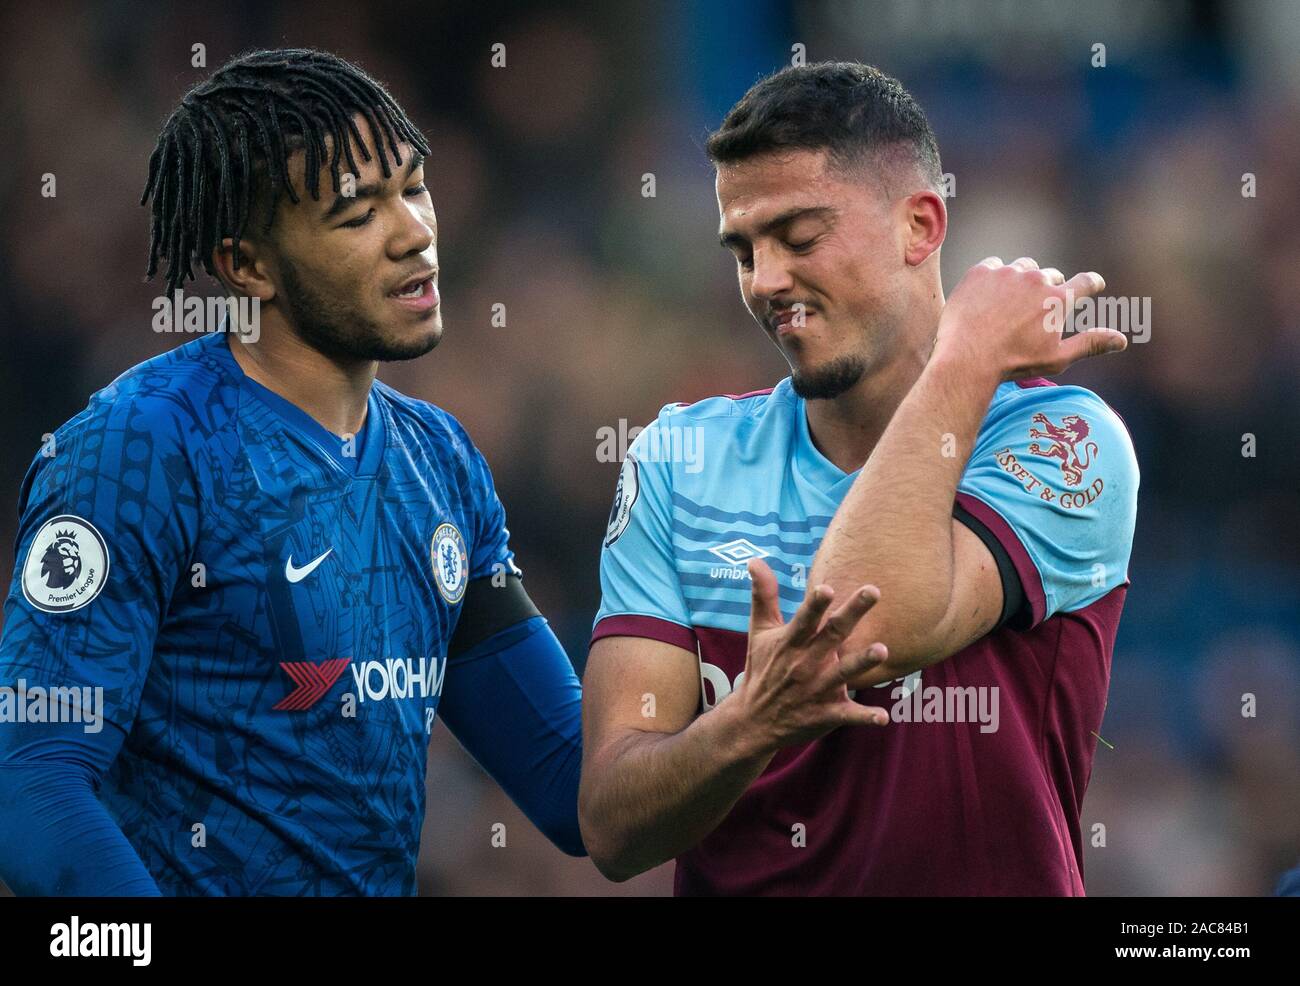 Pablo Fornals of West Ham Utd complains to Reece James of Chelsea about an elbow during the Premier League match between Chelsea and West Ham United a Stock Photo